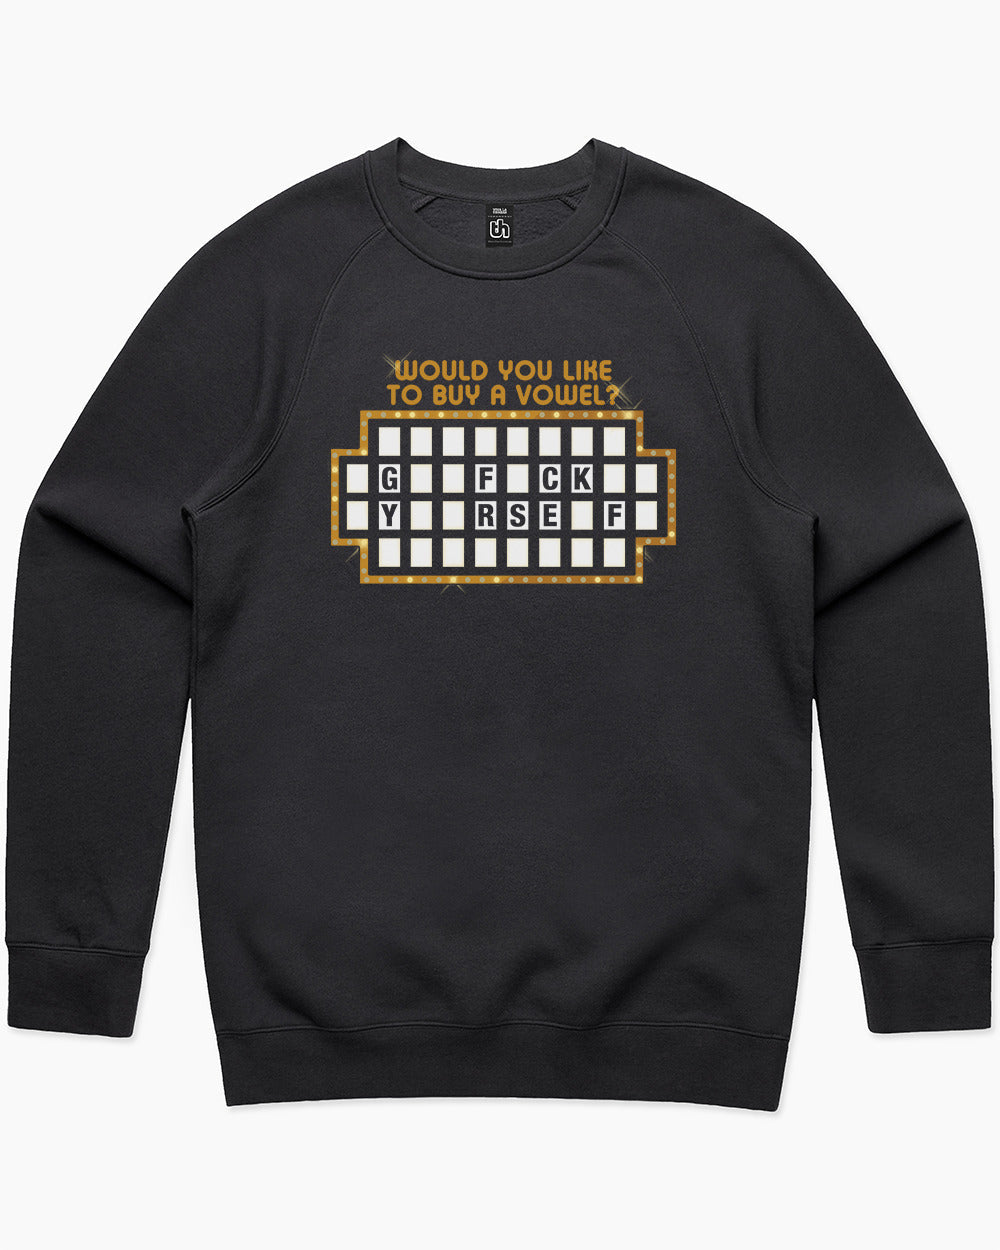 Would You Like To Buy A Vowel Or Would You To Buy A Vowel Sweater Australia Online #colour_black